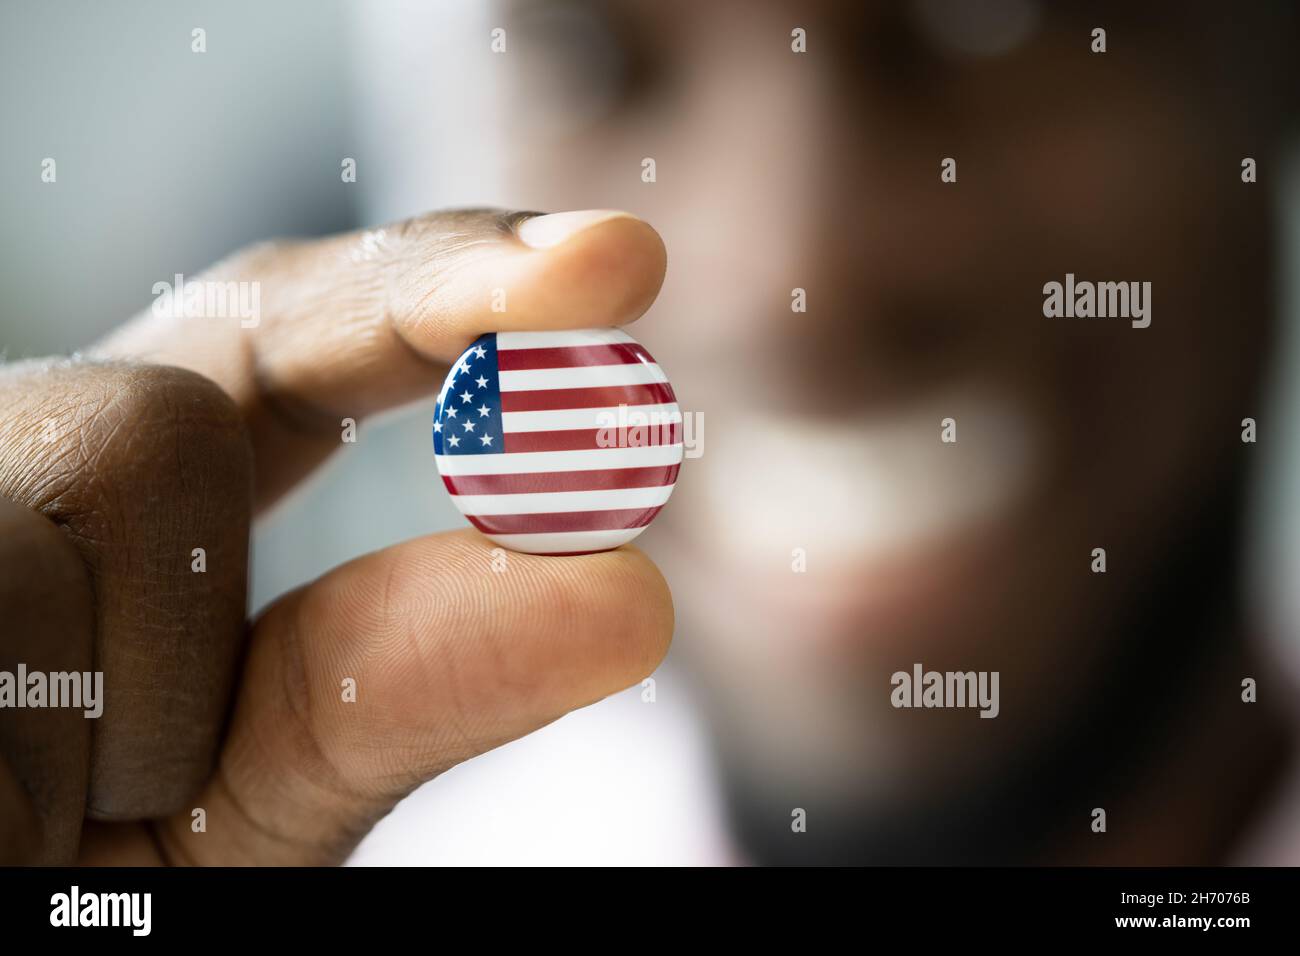 Presidential Election Campaign And Government Vote In America Stock Photo